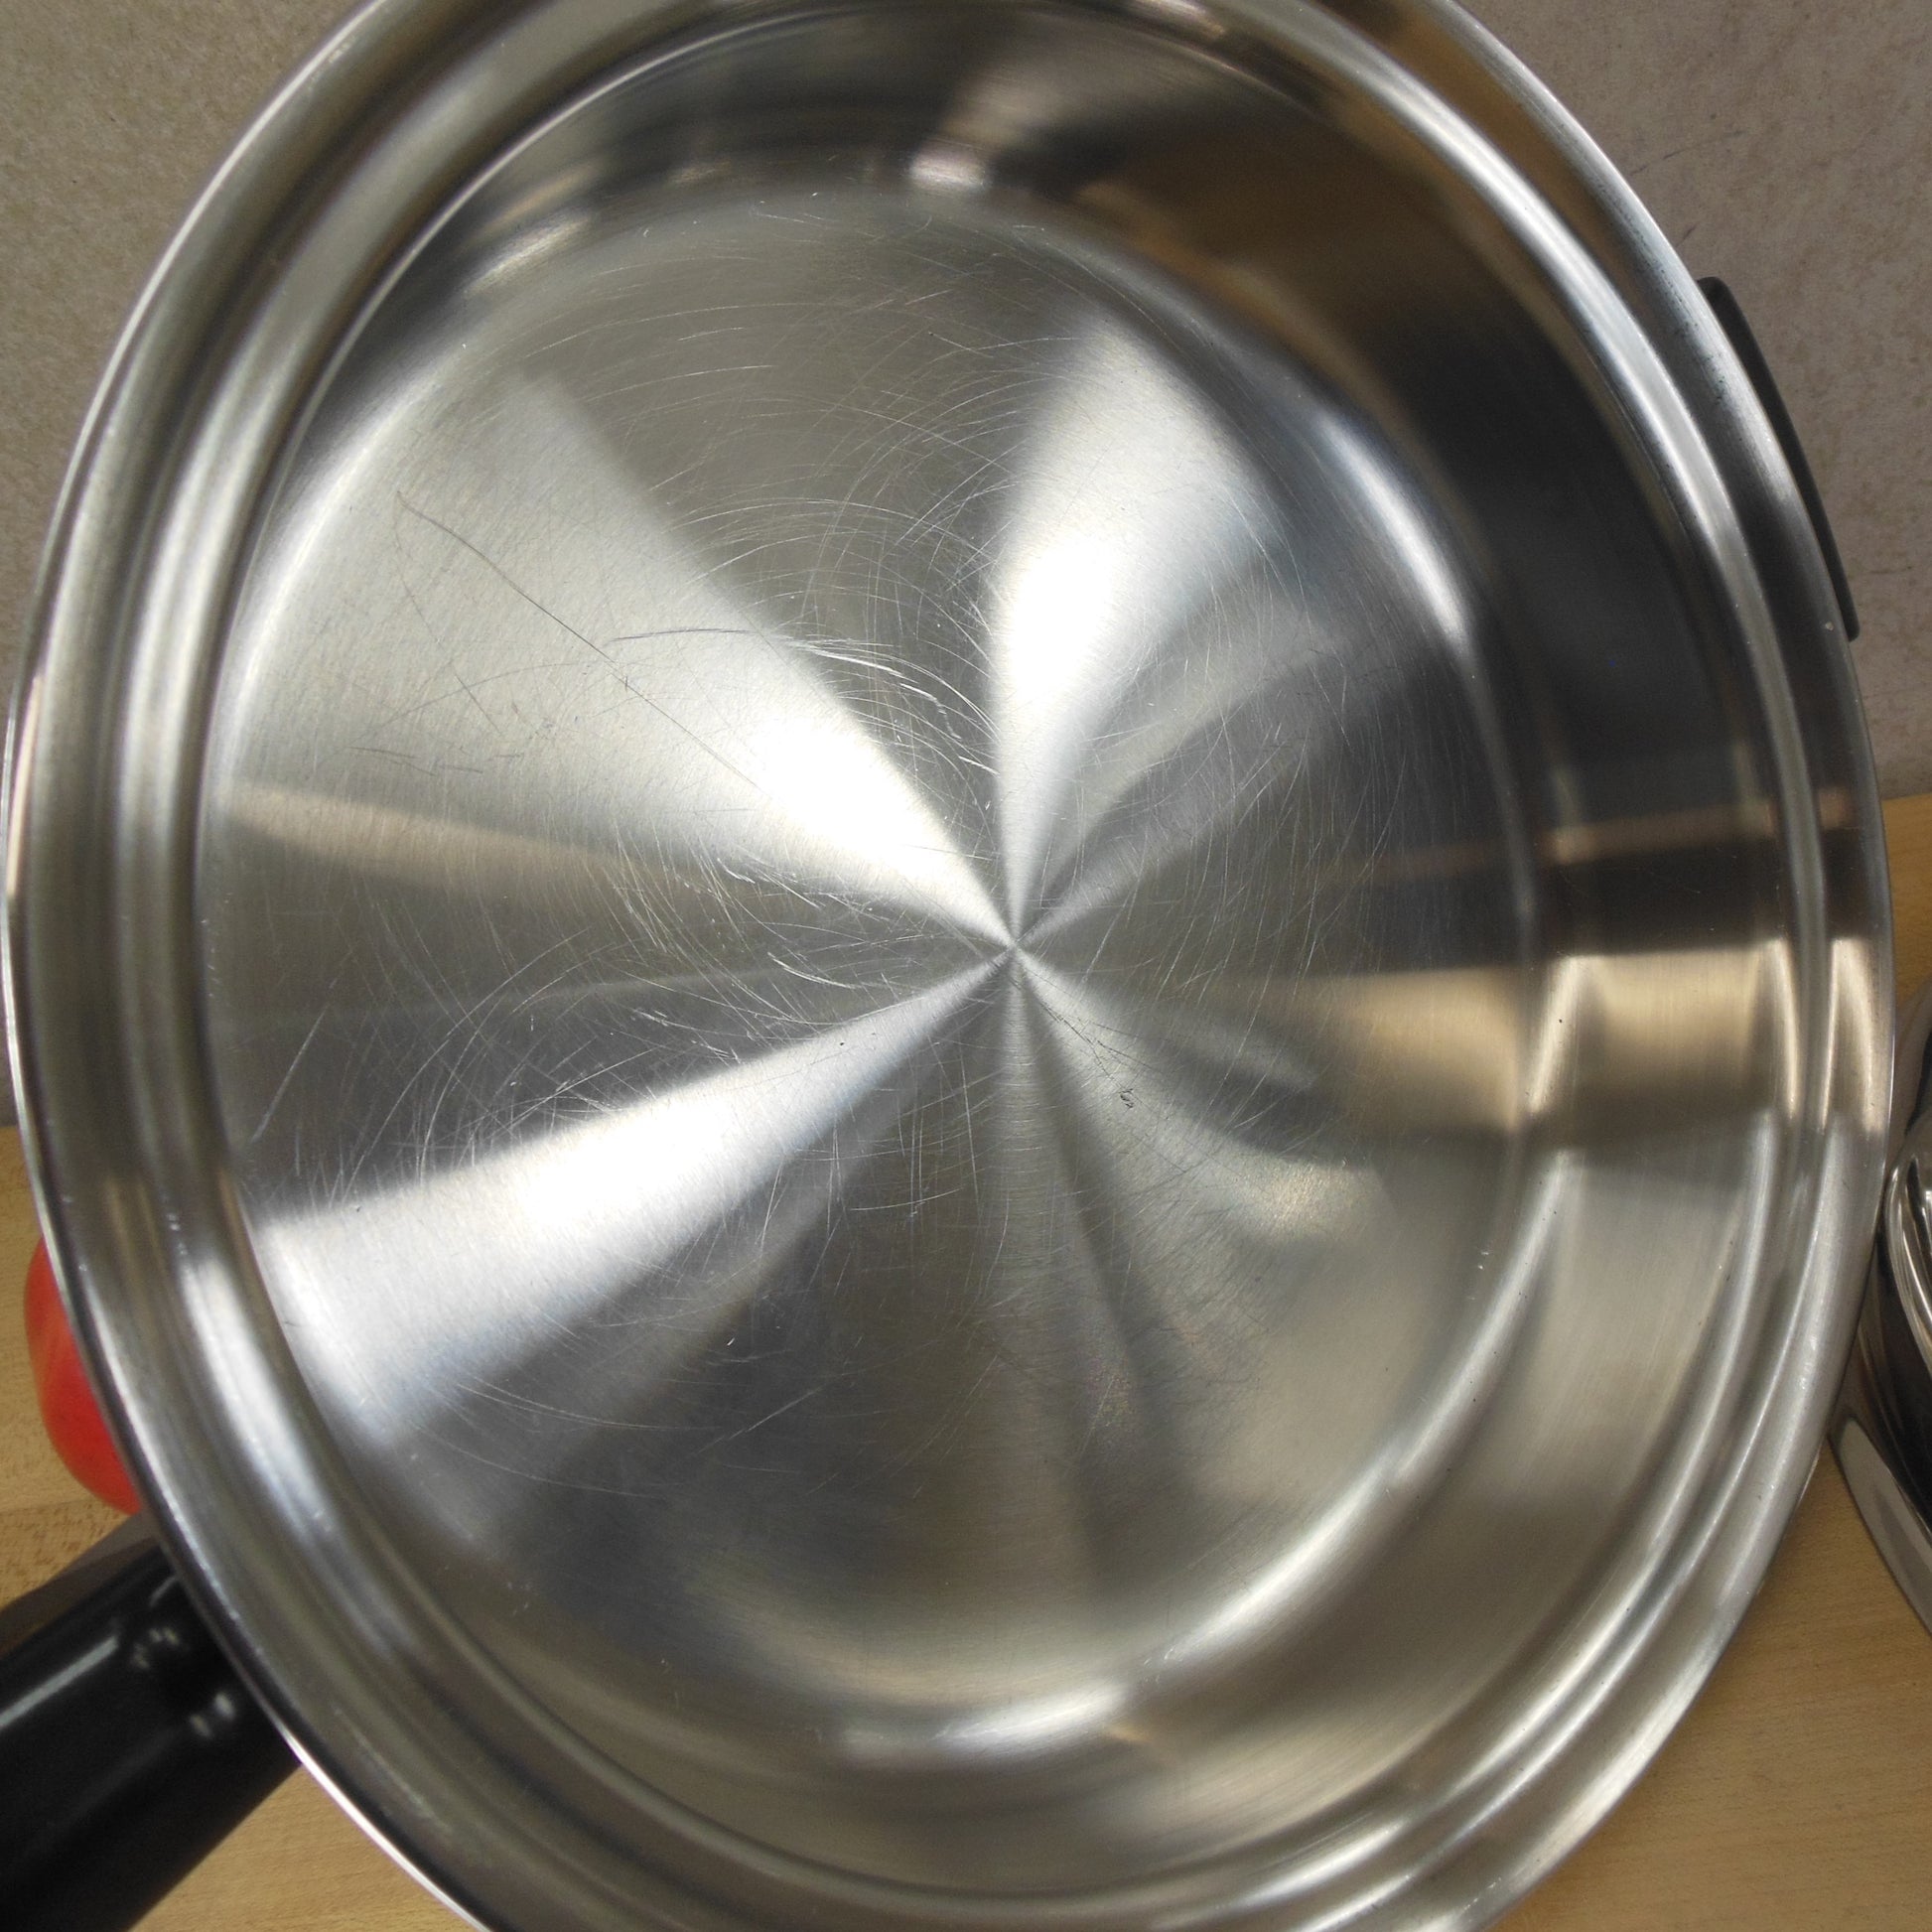 Amway Queen Multi-Ply 18/8 Stainless 10" Skillet & Lid used